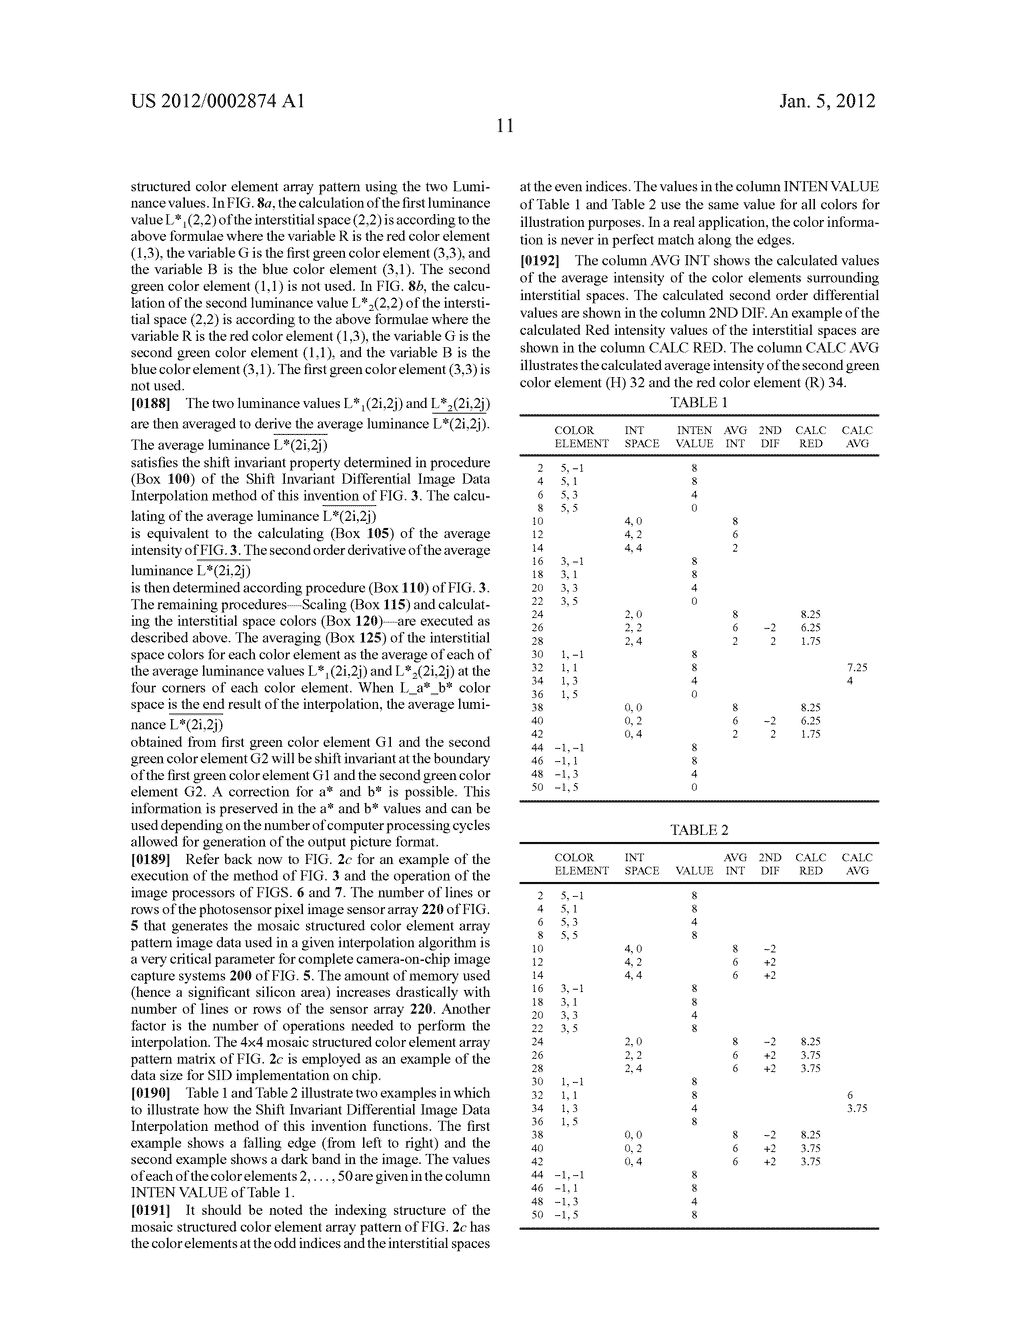 APPARATUS AND METHOD FOR SHIFT INVARIANT DIFFERENTIAL (SID) IMAGE DATA     INTERPOLATION IN FULLY POPULATED SHIFT INVARIANT MATRIX - diagram, schematic, and image 27